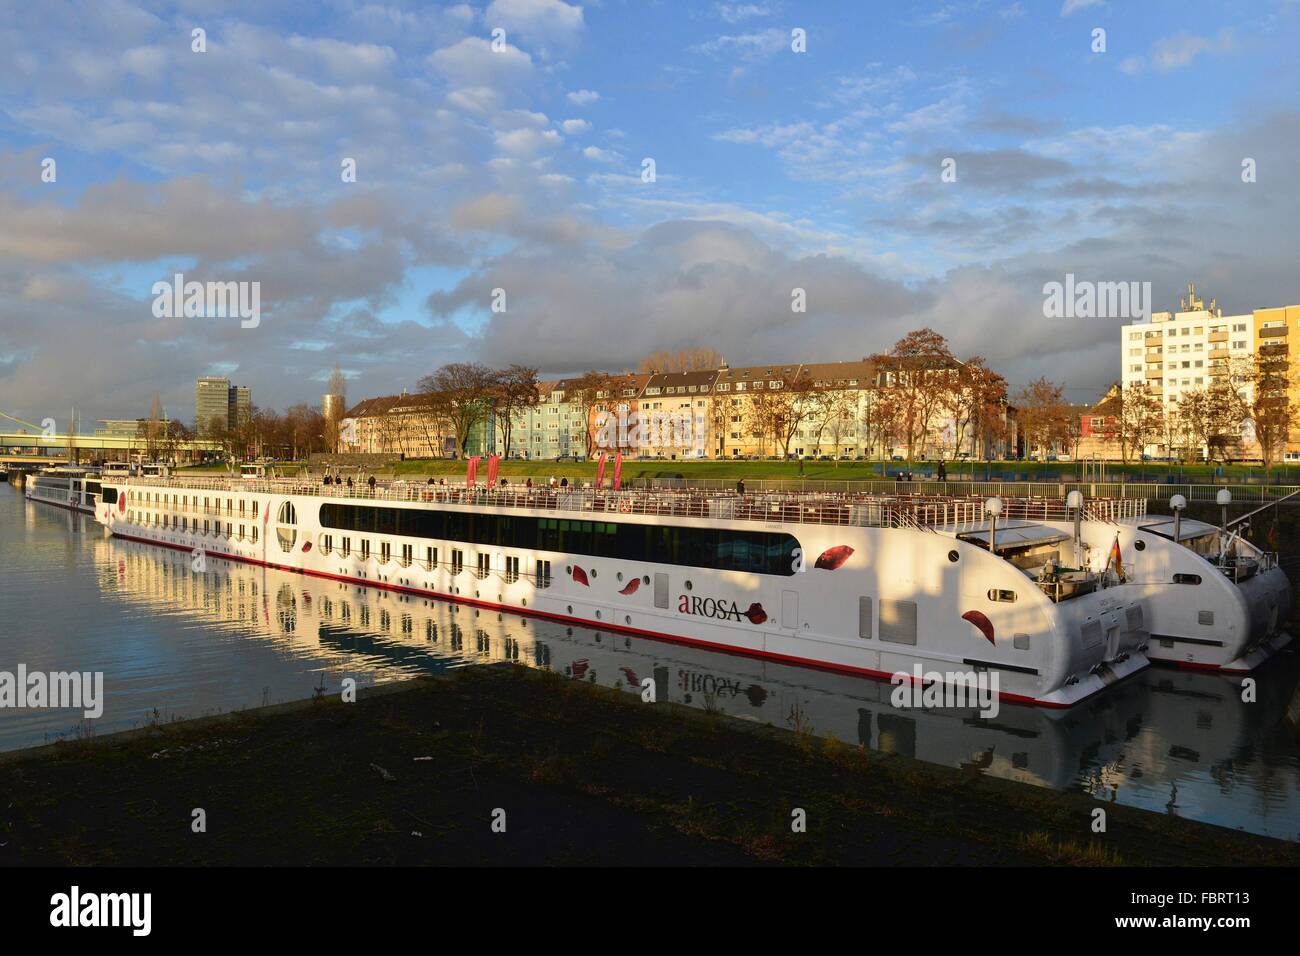 Two white hotel ships in the inland harbour with tenements at the bank of the Rhine in Cologne's district Deutz, 19 December 2013 Stock Photo